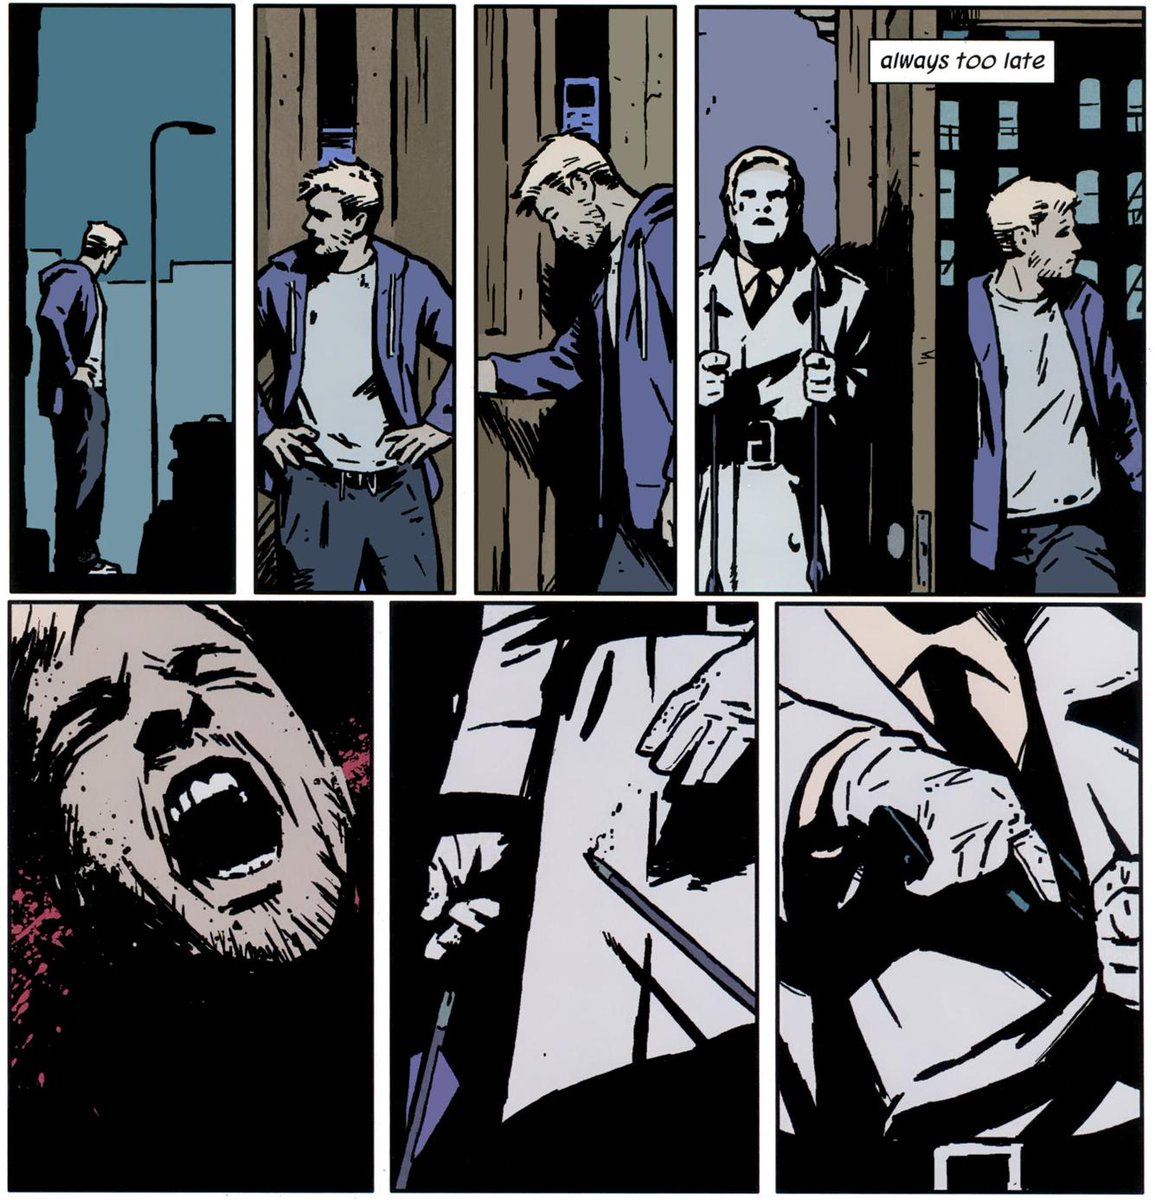 3) 16 years later (a.k.a. 2014), in the 15th issue of Matt Fraction and David Aja's critically acclaimed run, a villain know as the Clown stabbed Clint's ears, deafening him again.